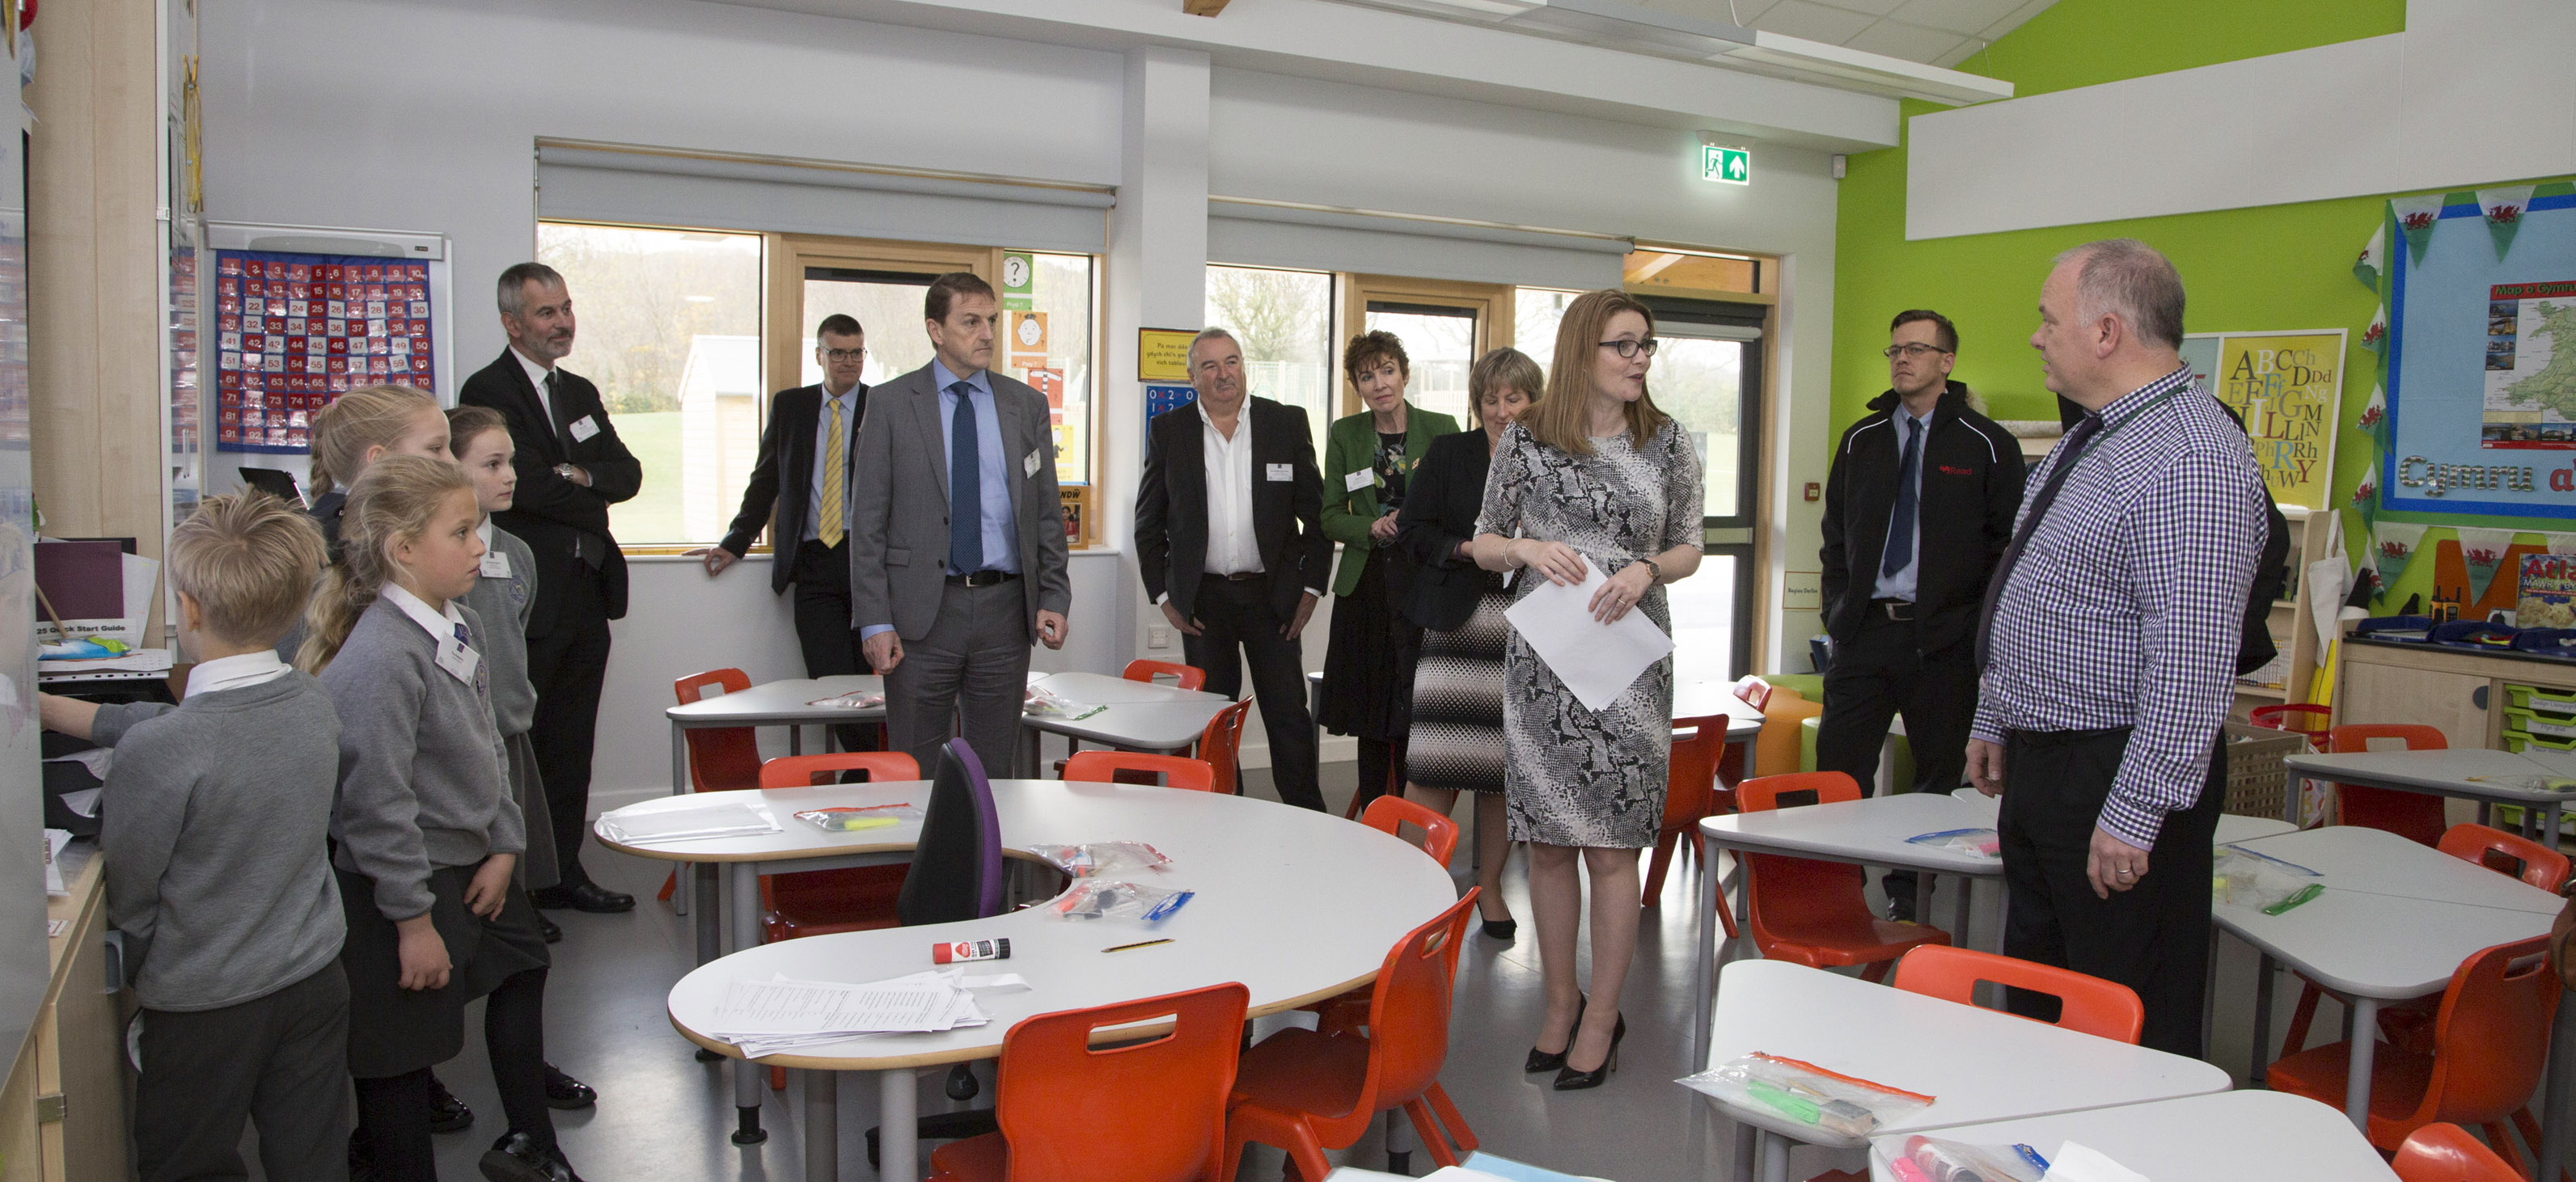 Tour of the Building - Classroom